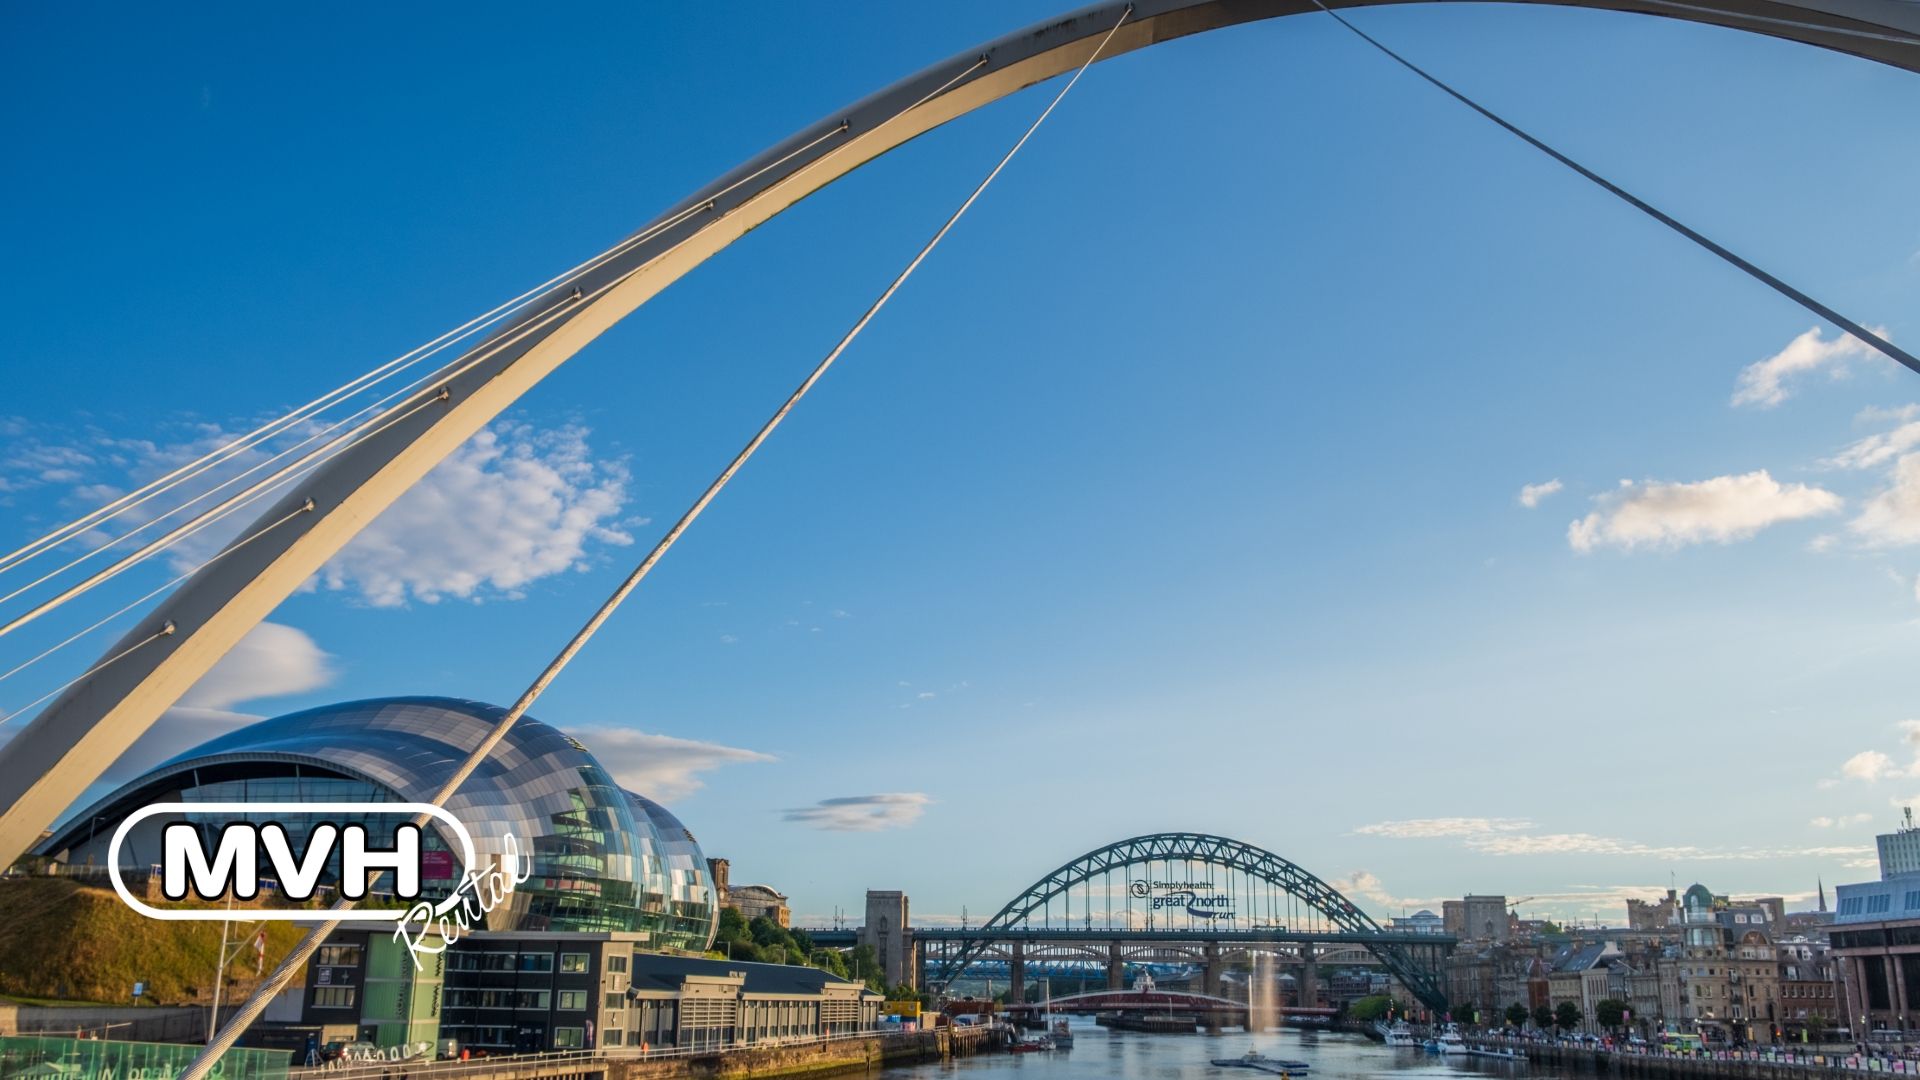 The North East is a hotbed for music venues of all styles, genres and sizes. Join us as we run down 6 of the best – and take in some sights along the way.